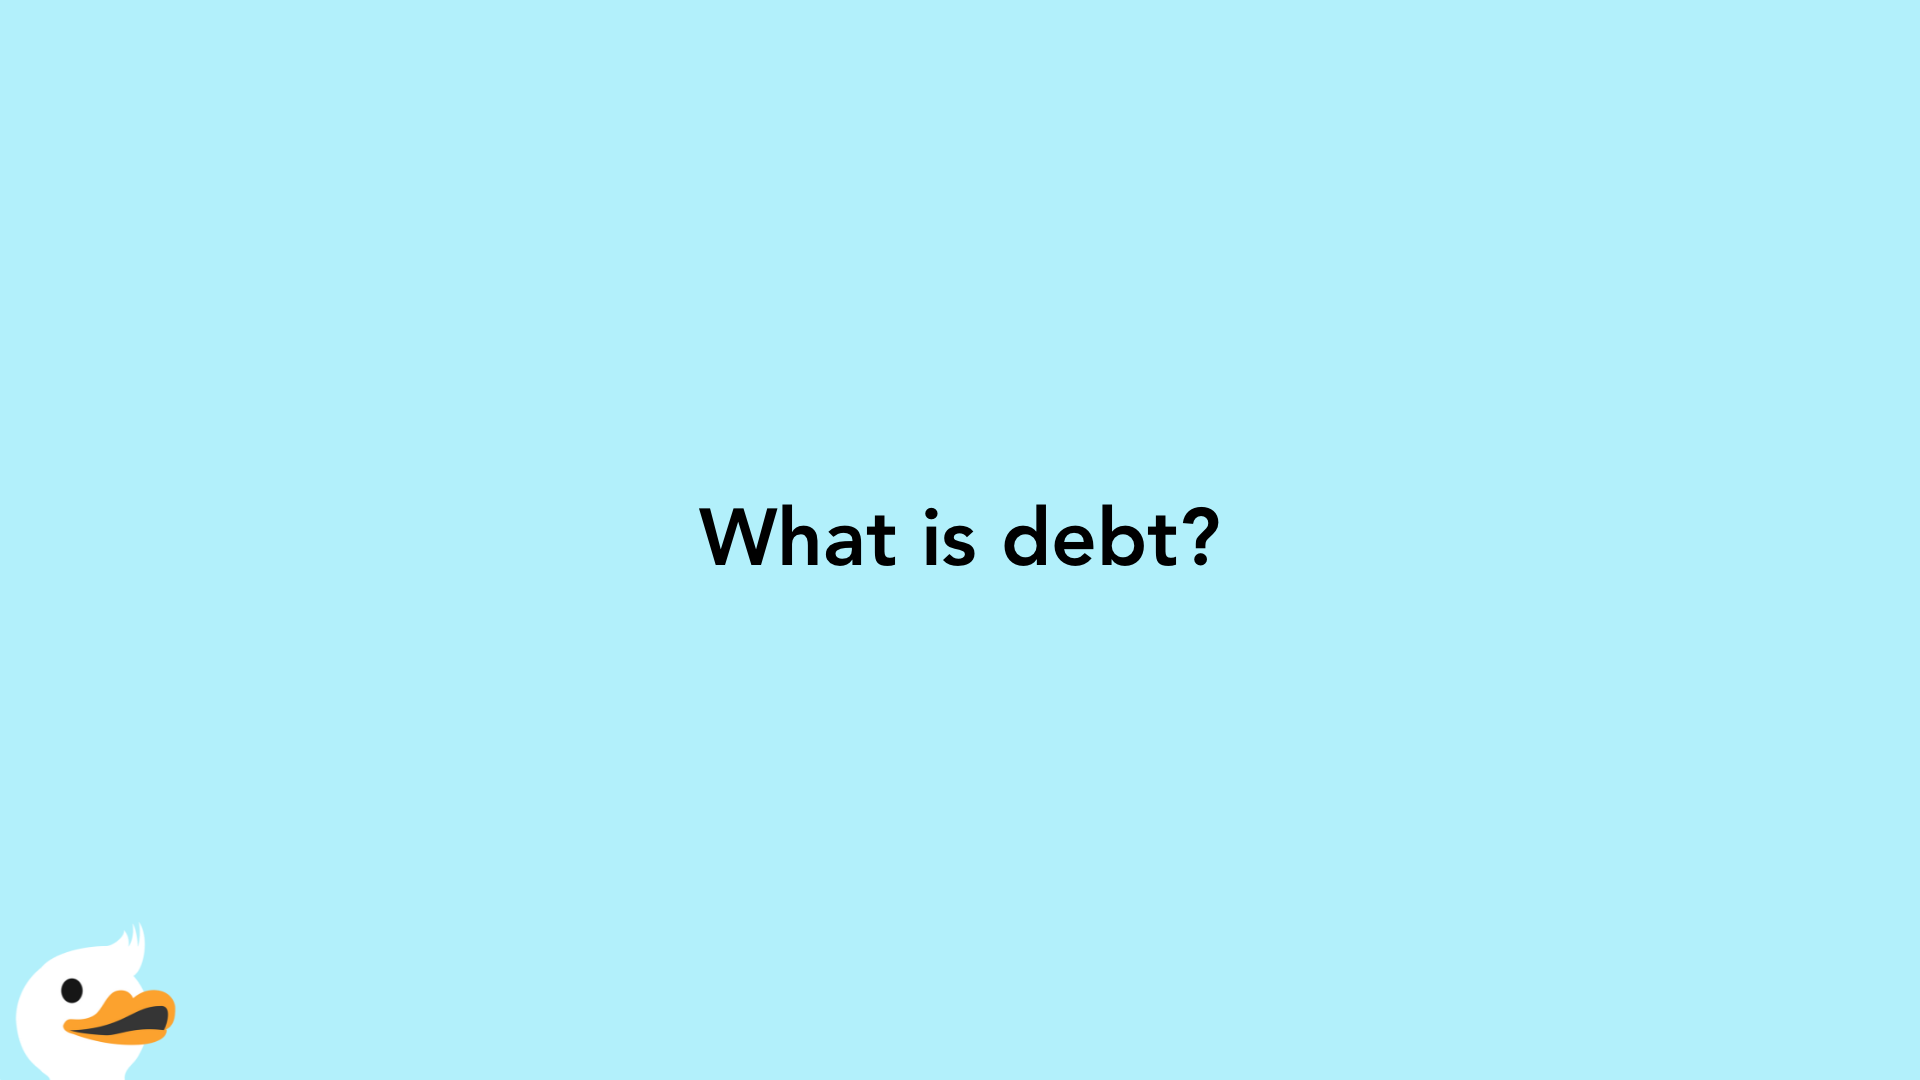 What is debt?